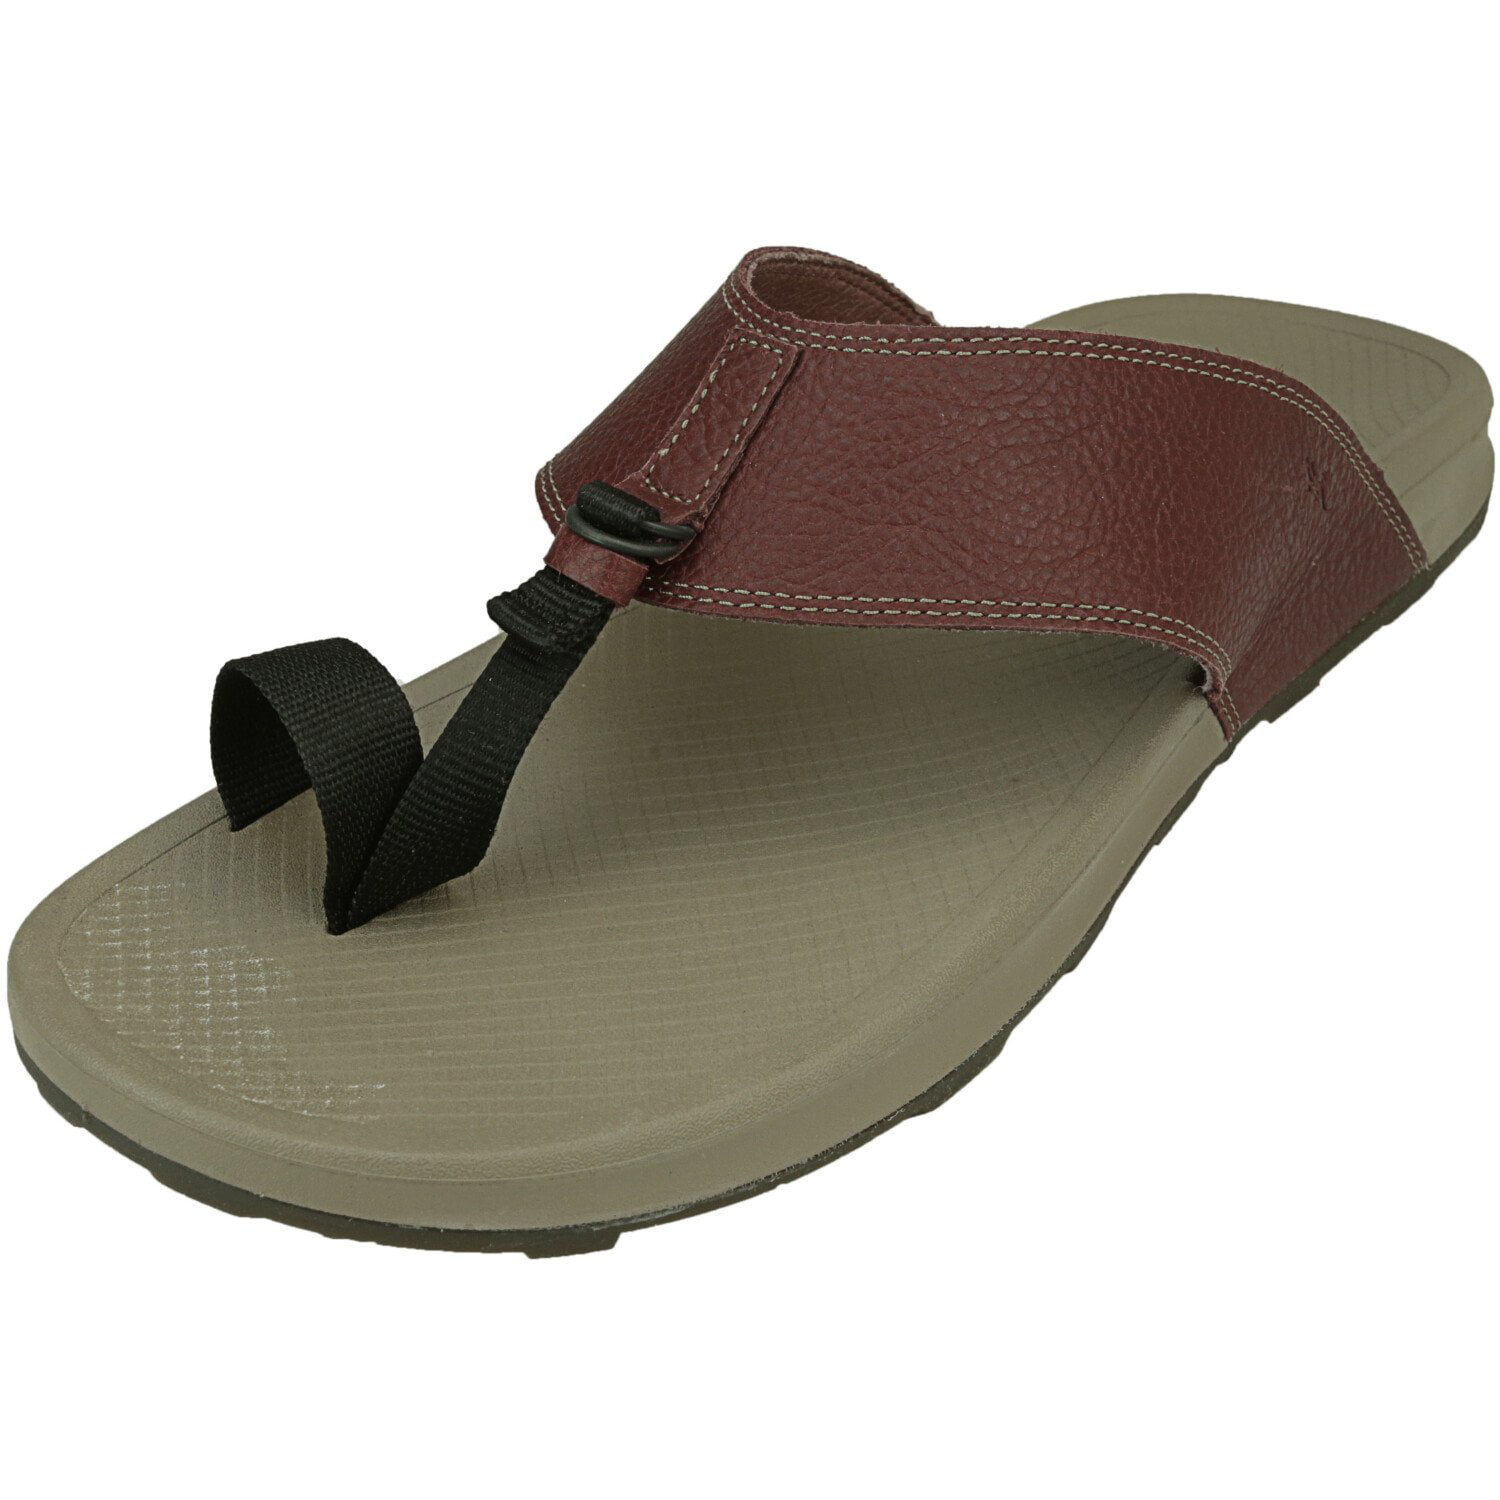 walmart sandals that look like chacos